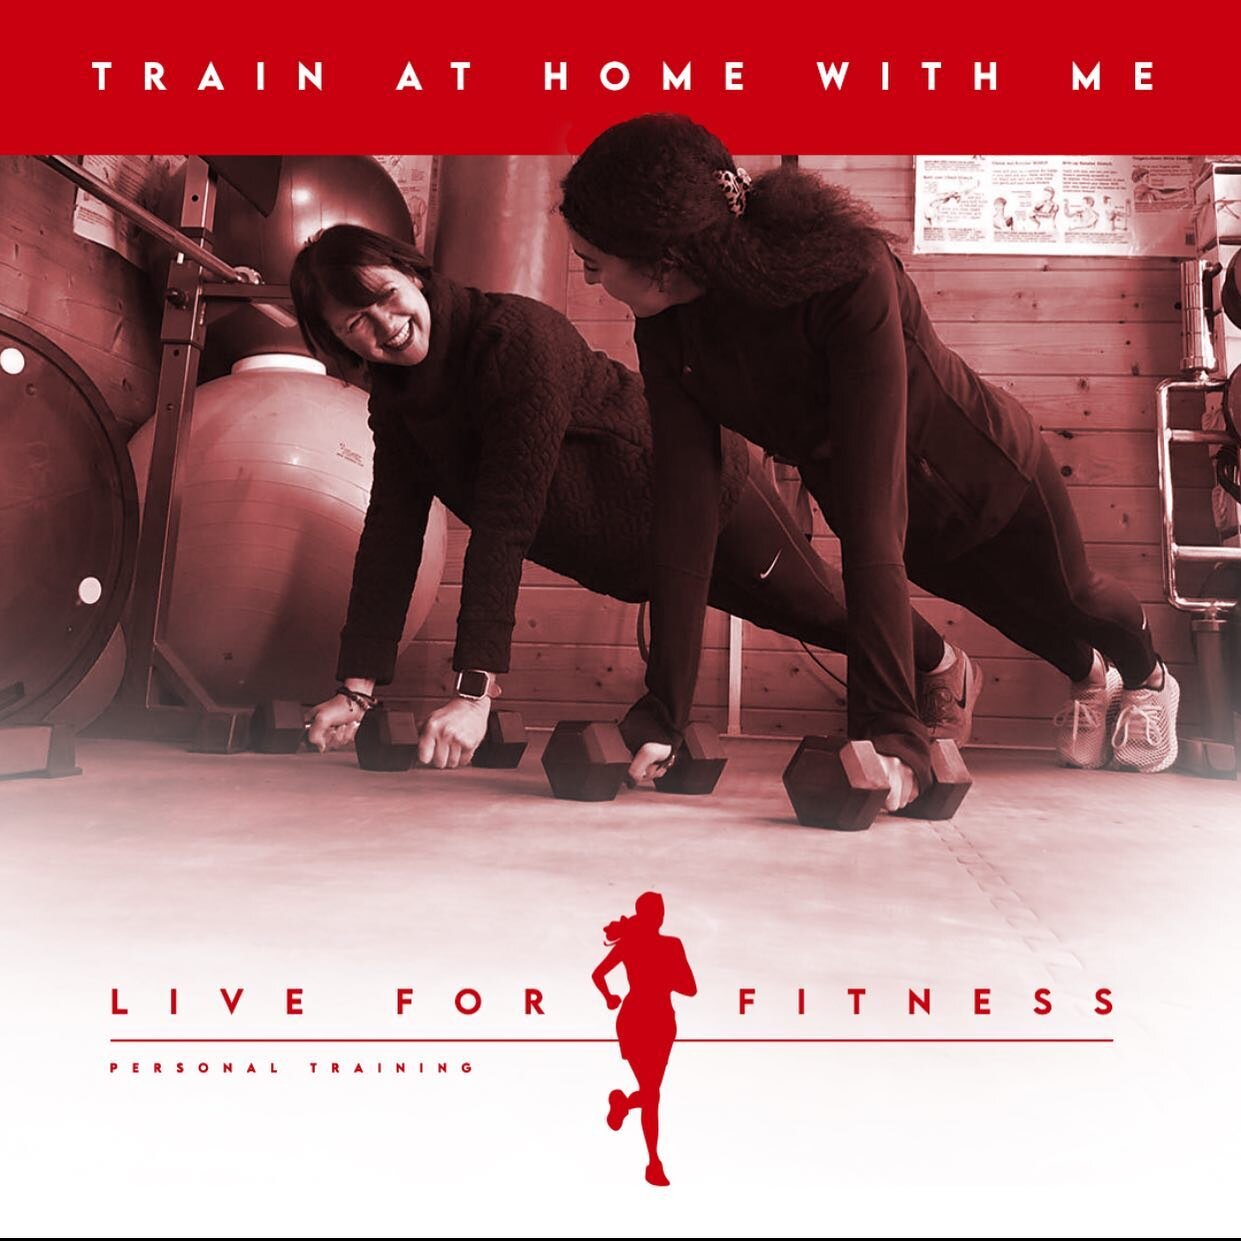 *FREE ONLINE TRAINING SESSION*
~
TRAIN AT HOME WITH ME!
~
During this difficult time why not train at home, with Live for Fitness via Skype!
~
Book your free online trial session now
https://www.liveforfitness.co.uk/book-free-consultation
~
🏋🏻&zwj;